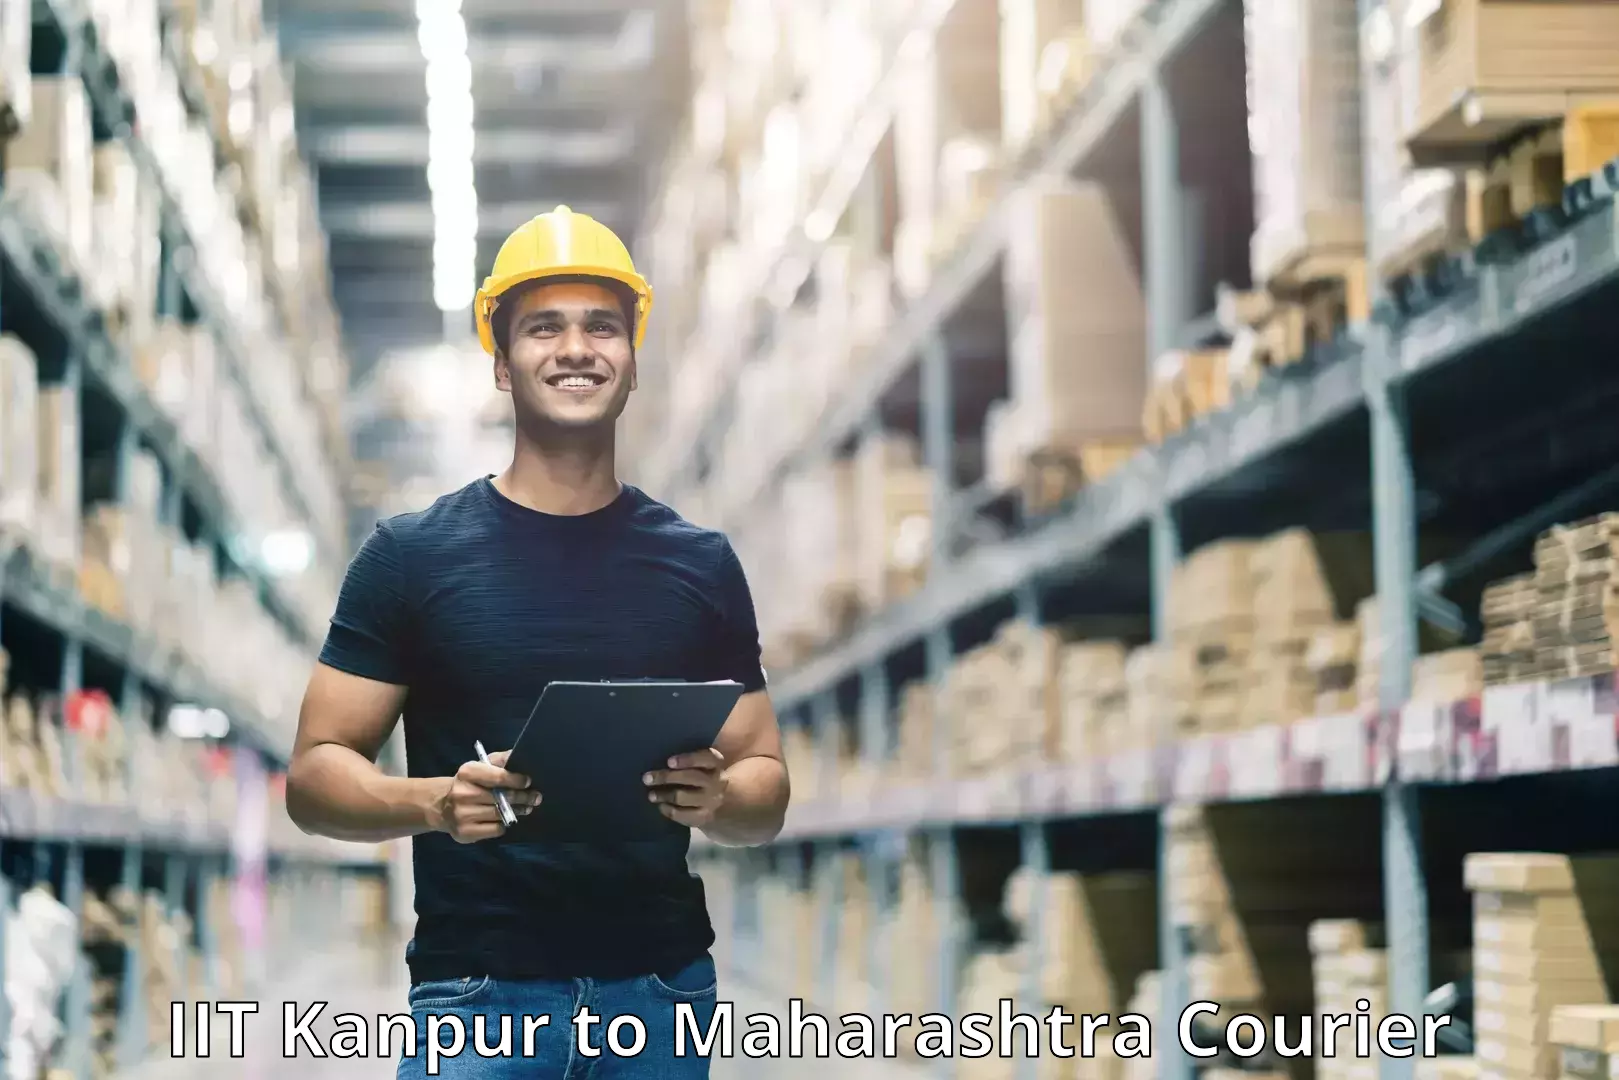 Customer-oriented courier services in IIT Kanpur to Mahim